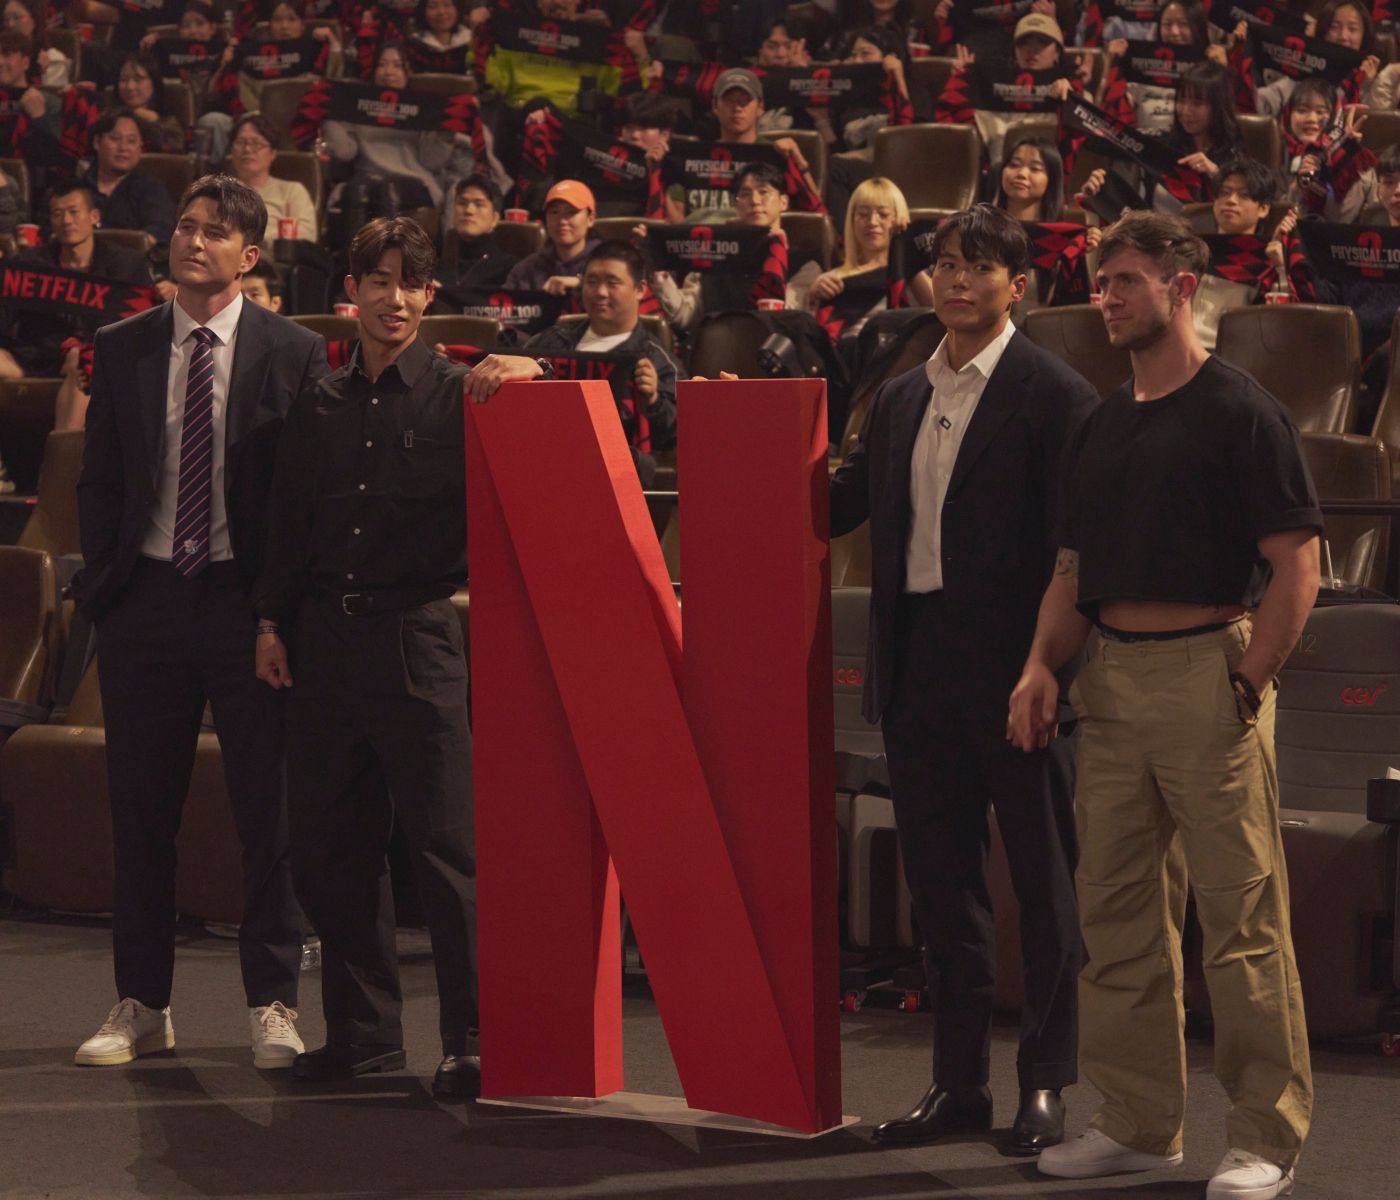 'Physical 100' season 2 final 4 Andre Jin, Beom-Seok Hong, Amotti, and Justin Harvey stand next to the Netflix logo in a movie theater.